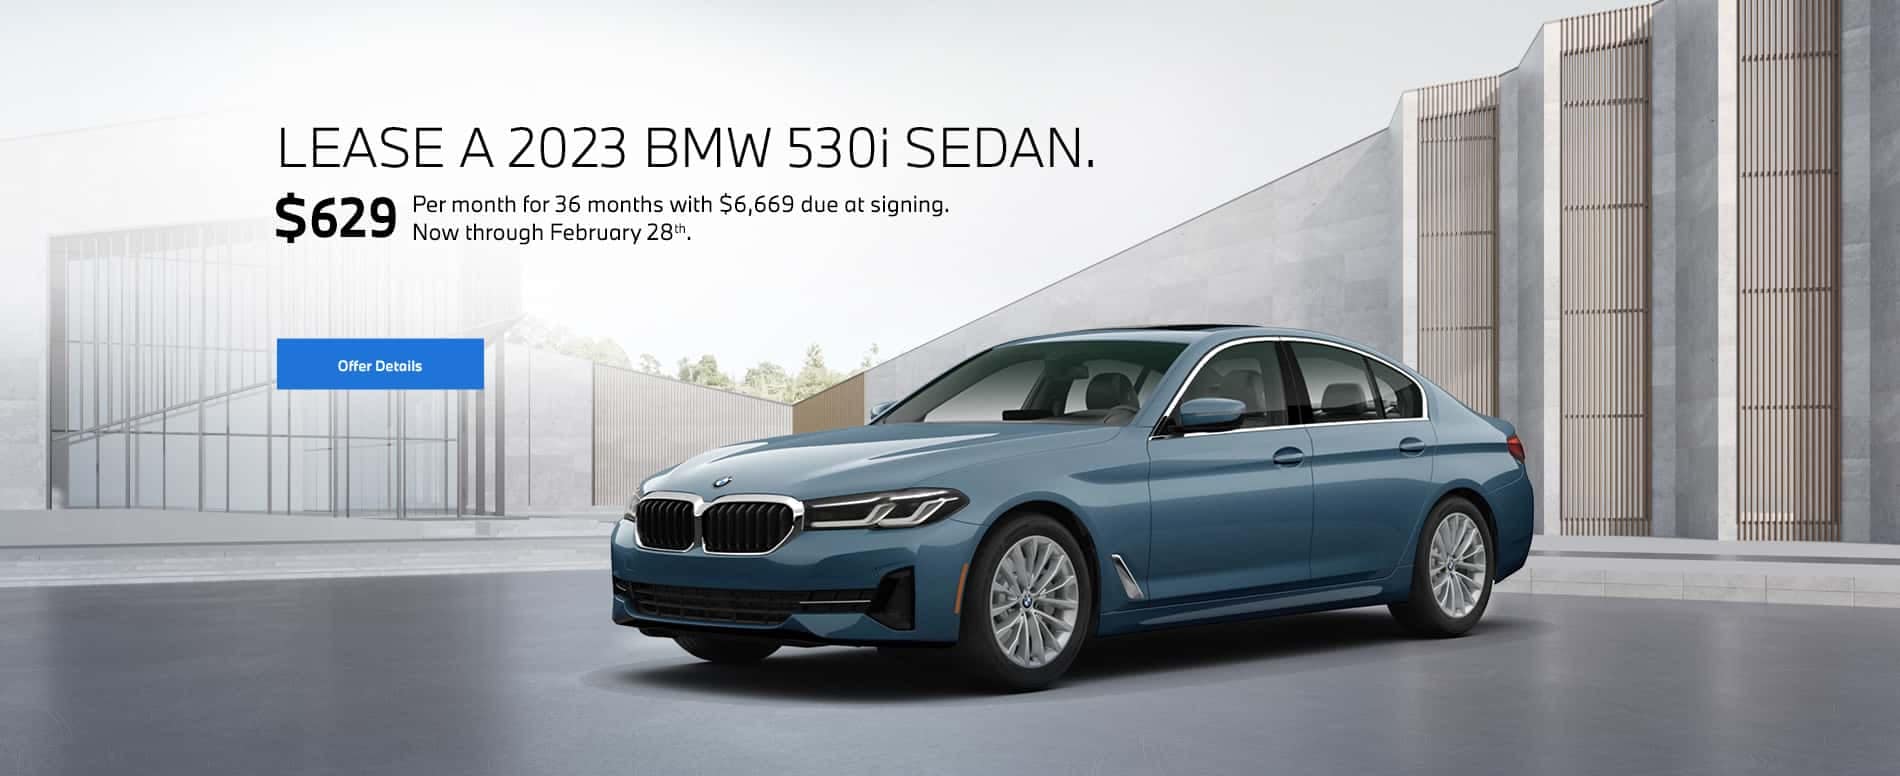 2023 530i Sedan lease starting at $629 per month for 36 months